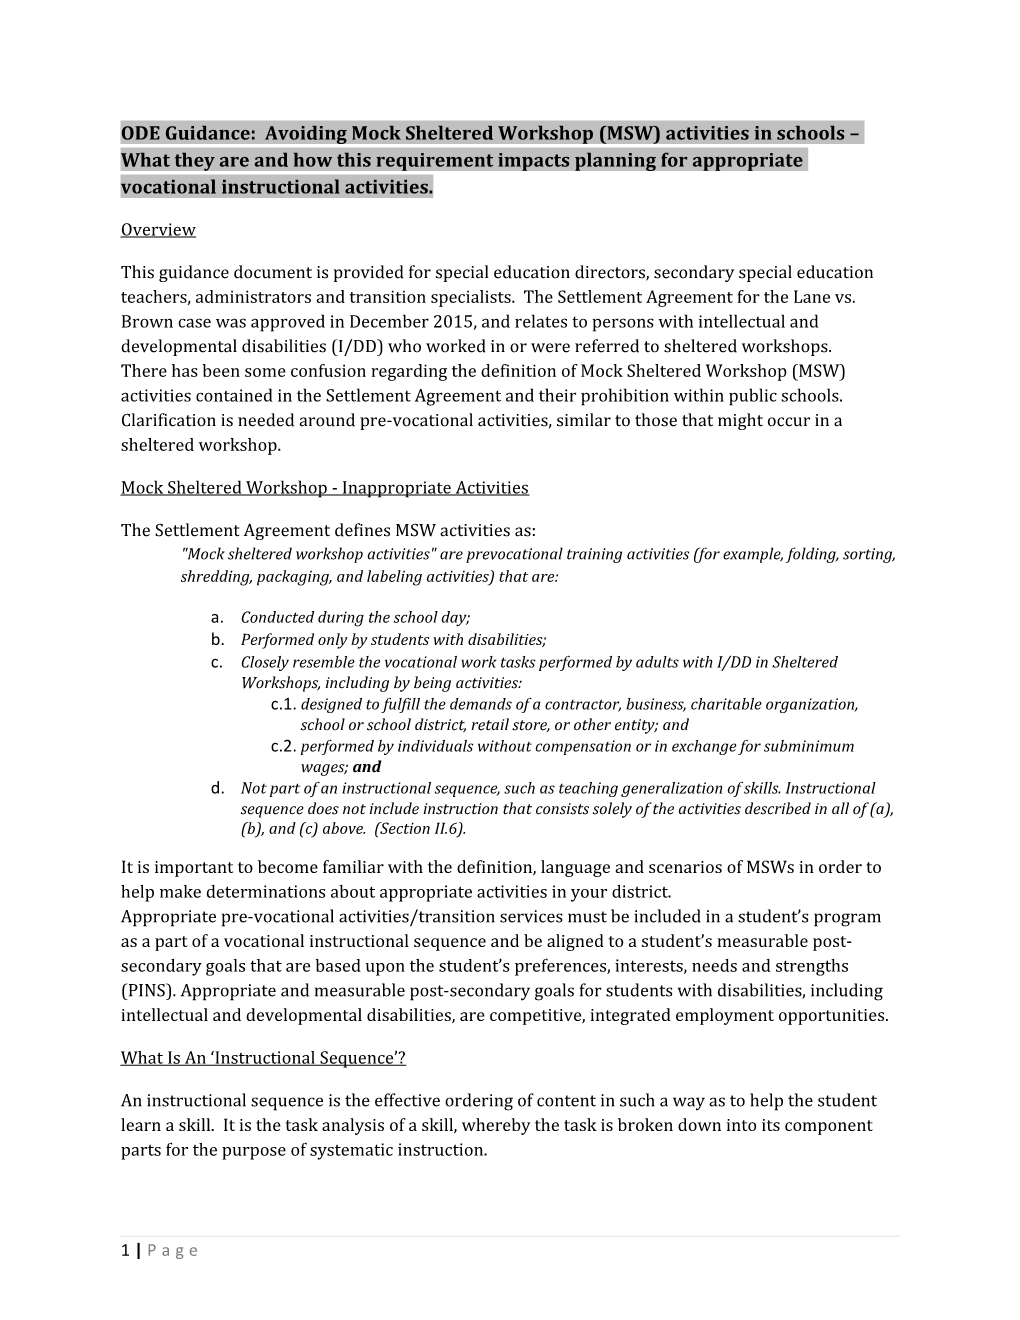 ODE Guidance: Avoiding Mock Sheltered Workshop (MSW) Activities in Schools What They Are